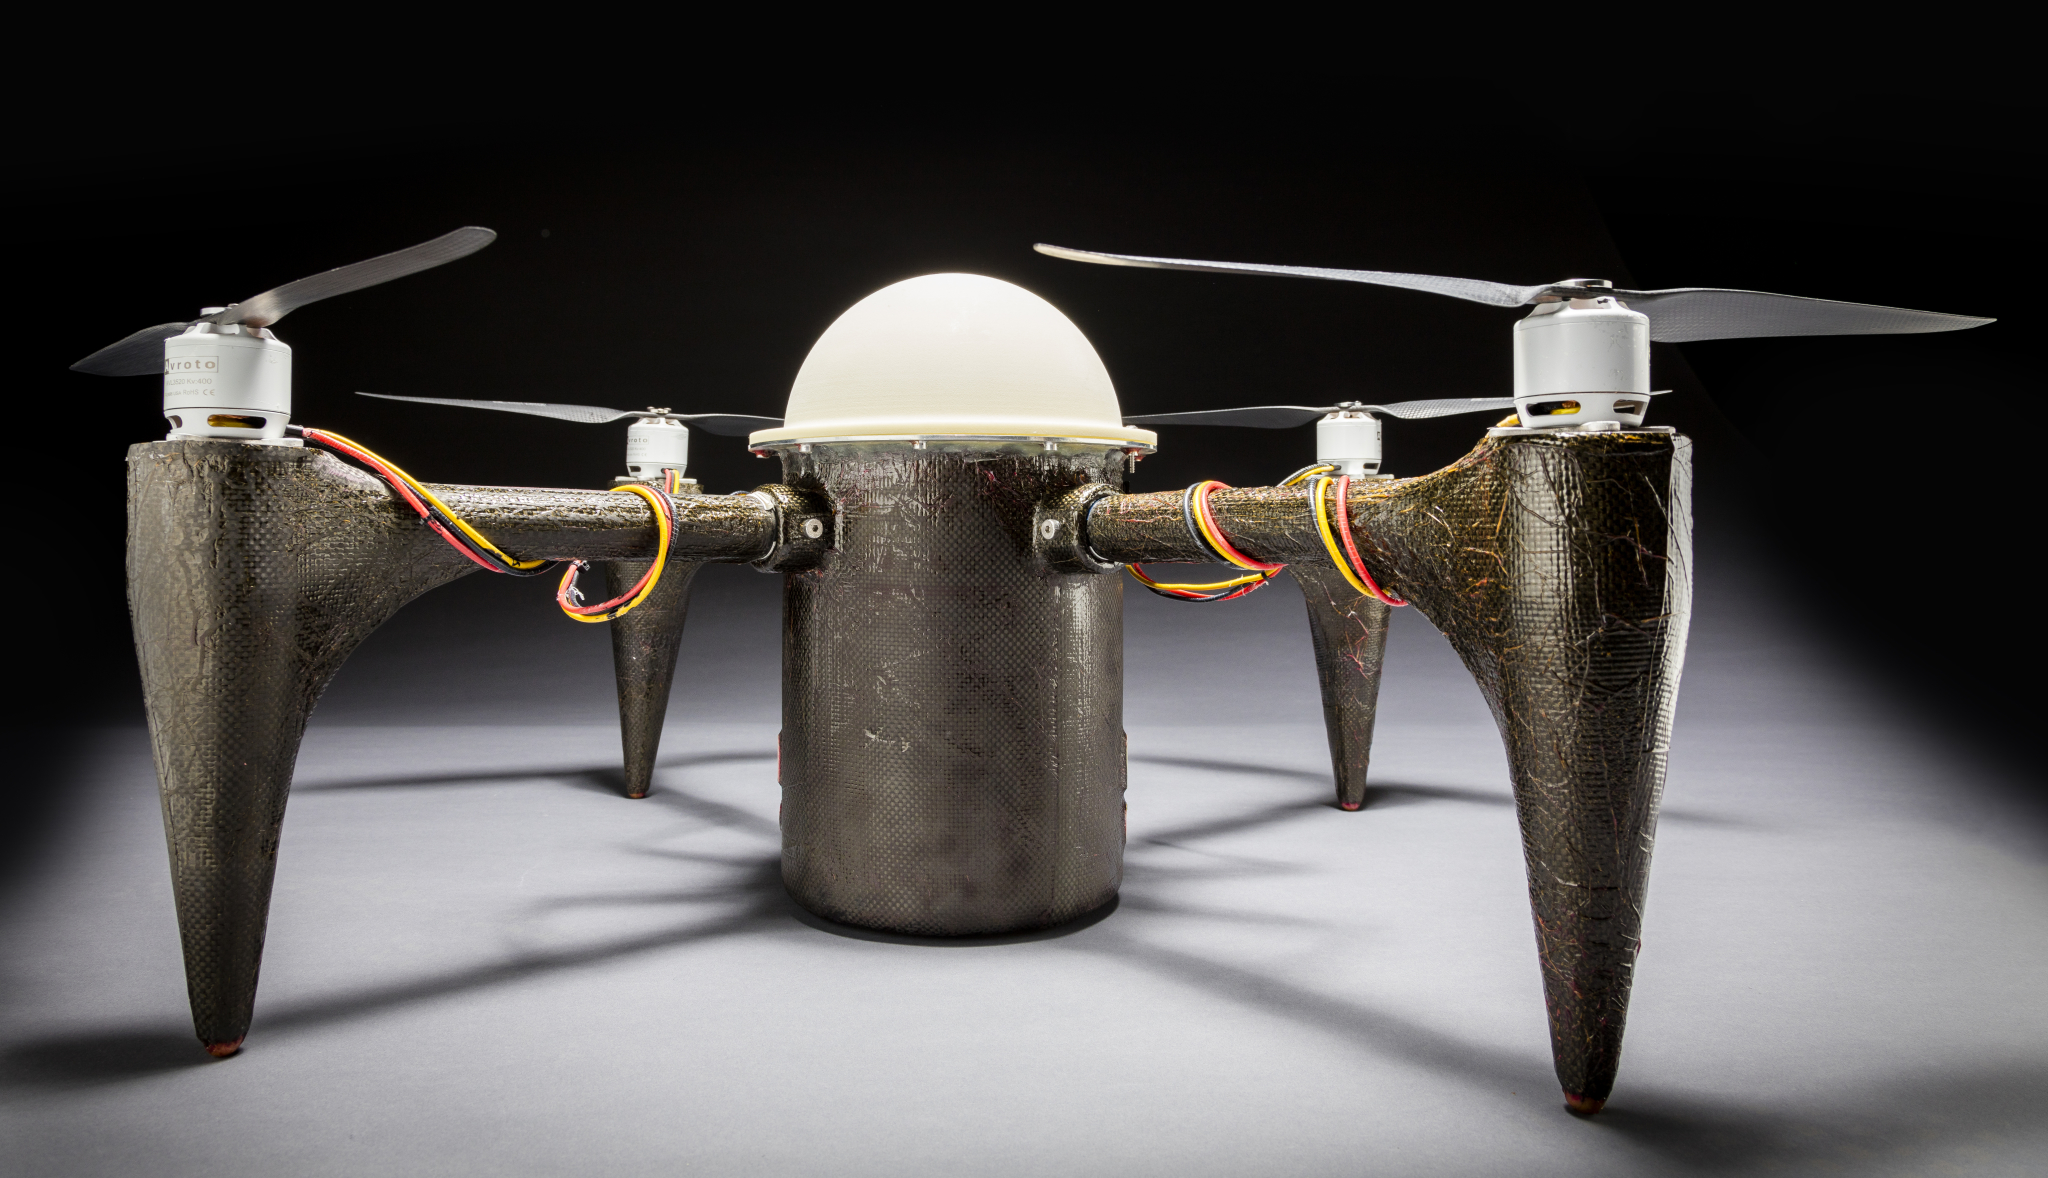 This 3D Printed Drone Can Wait Underwater And Launch From The Sea